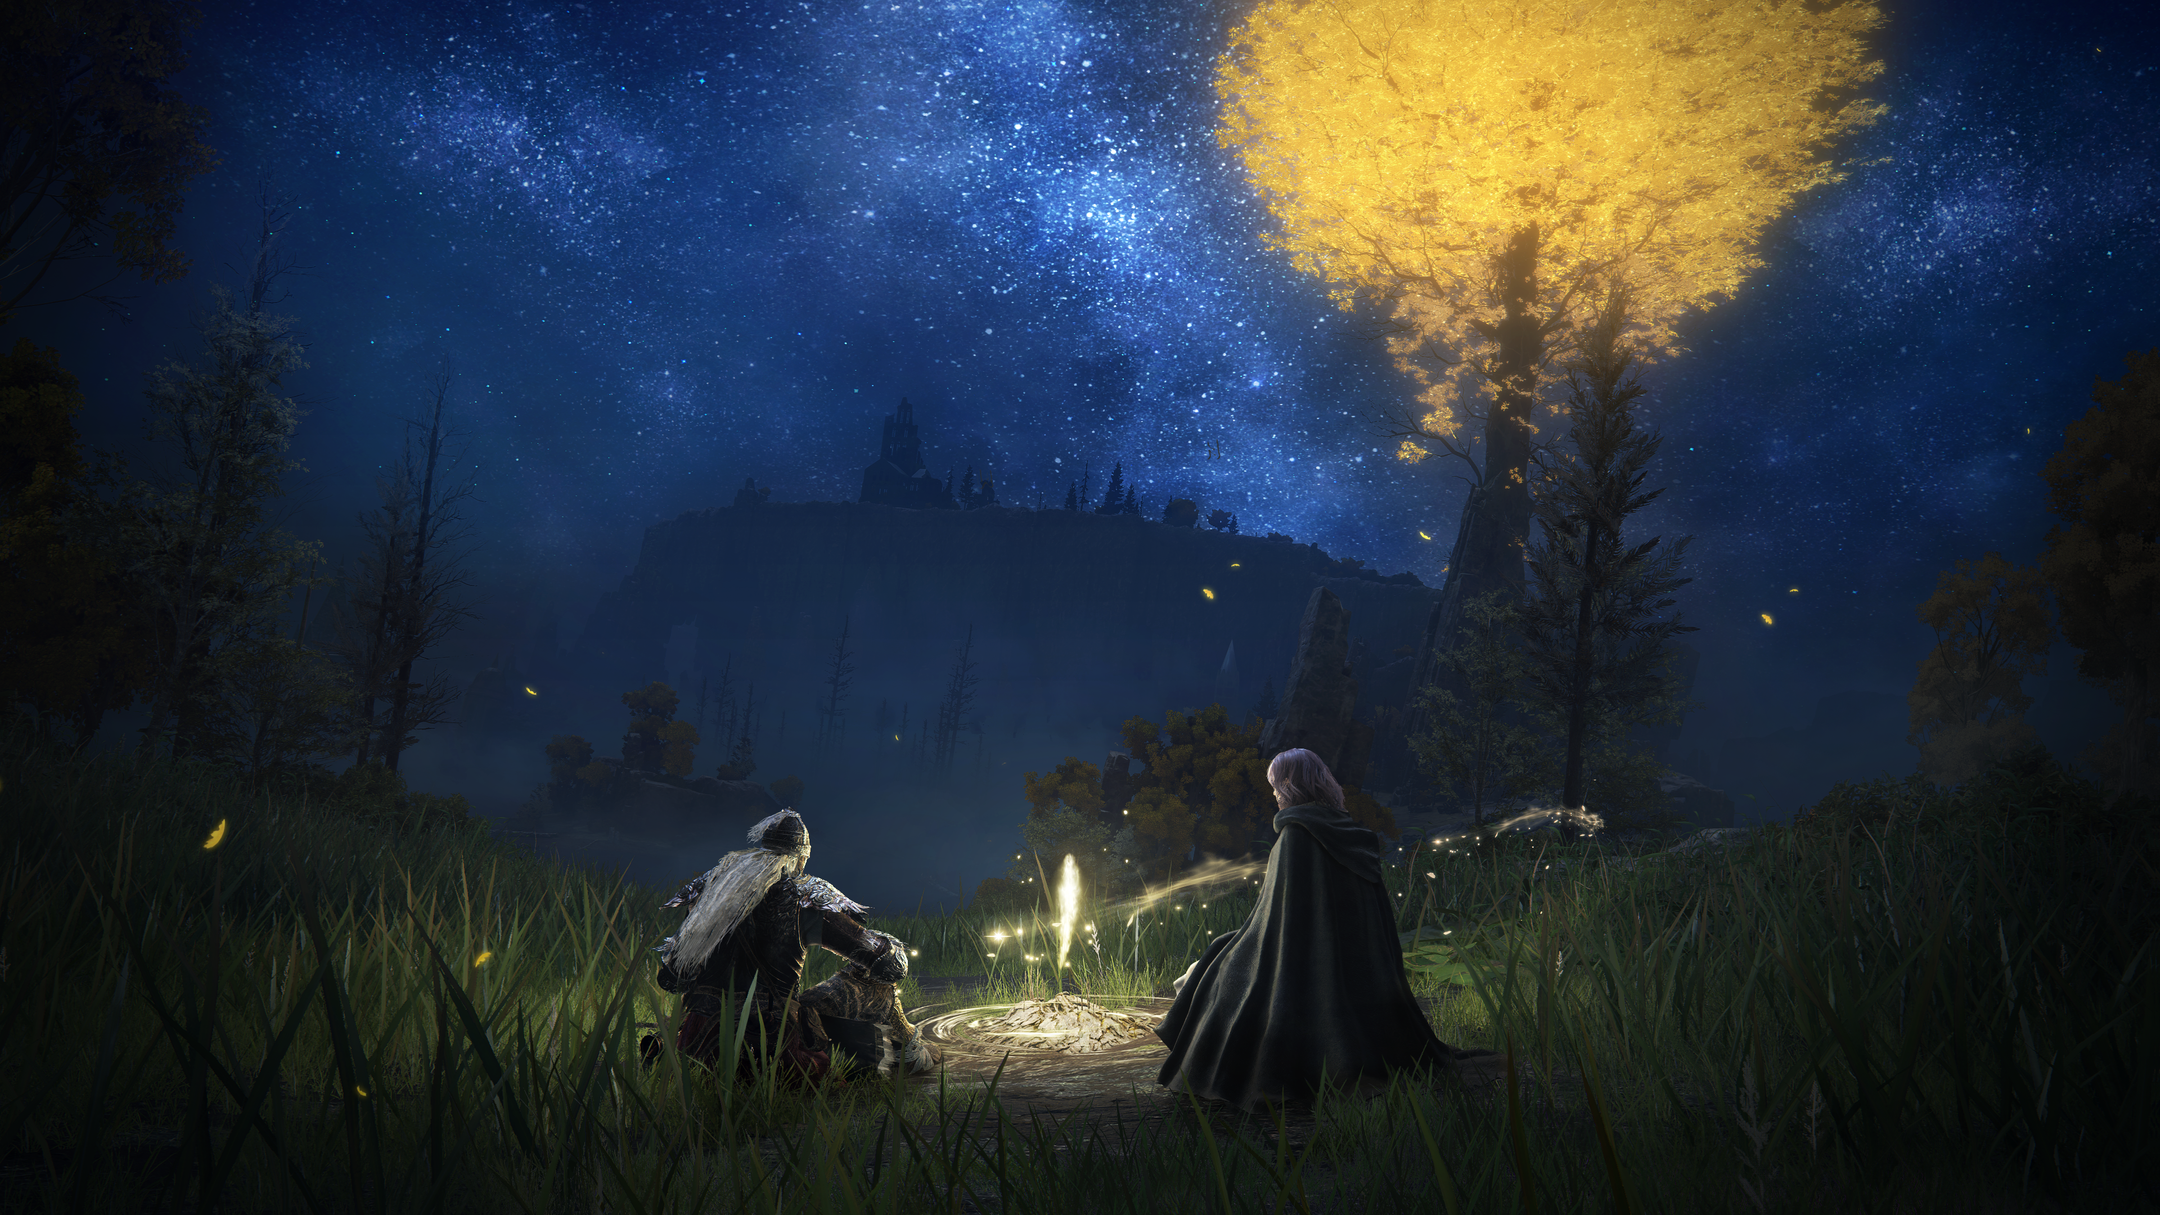 The player character in Elden Ring sitting with Melina at a site of grace. The night sky blazes with stars, and a tall tree in the background emits light.